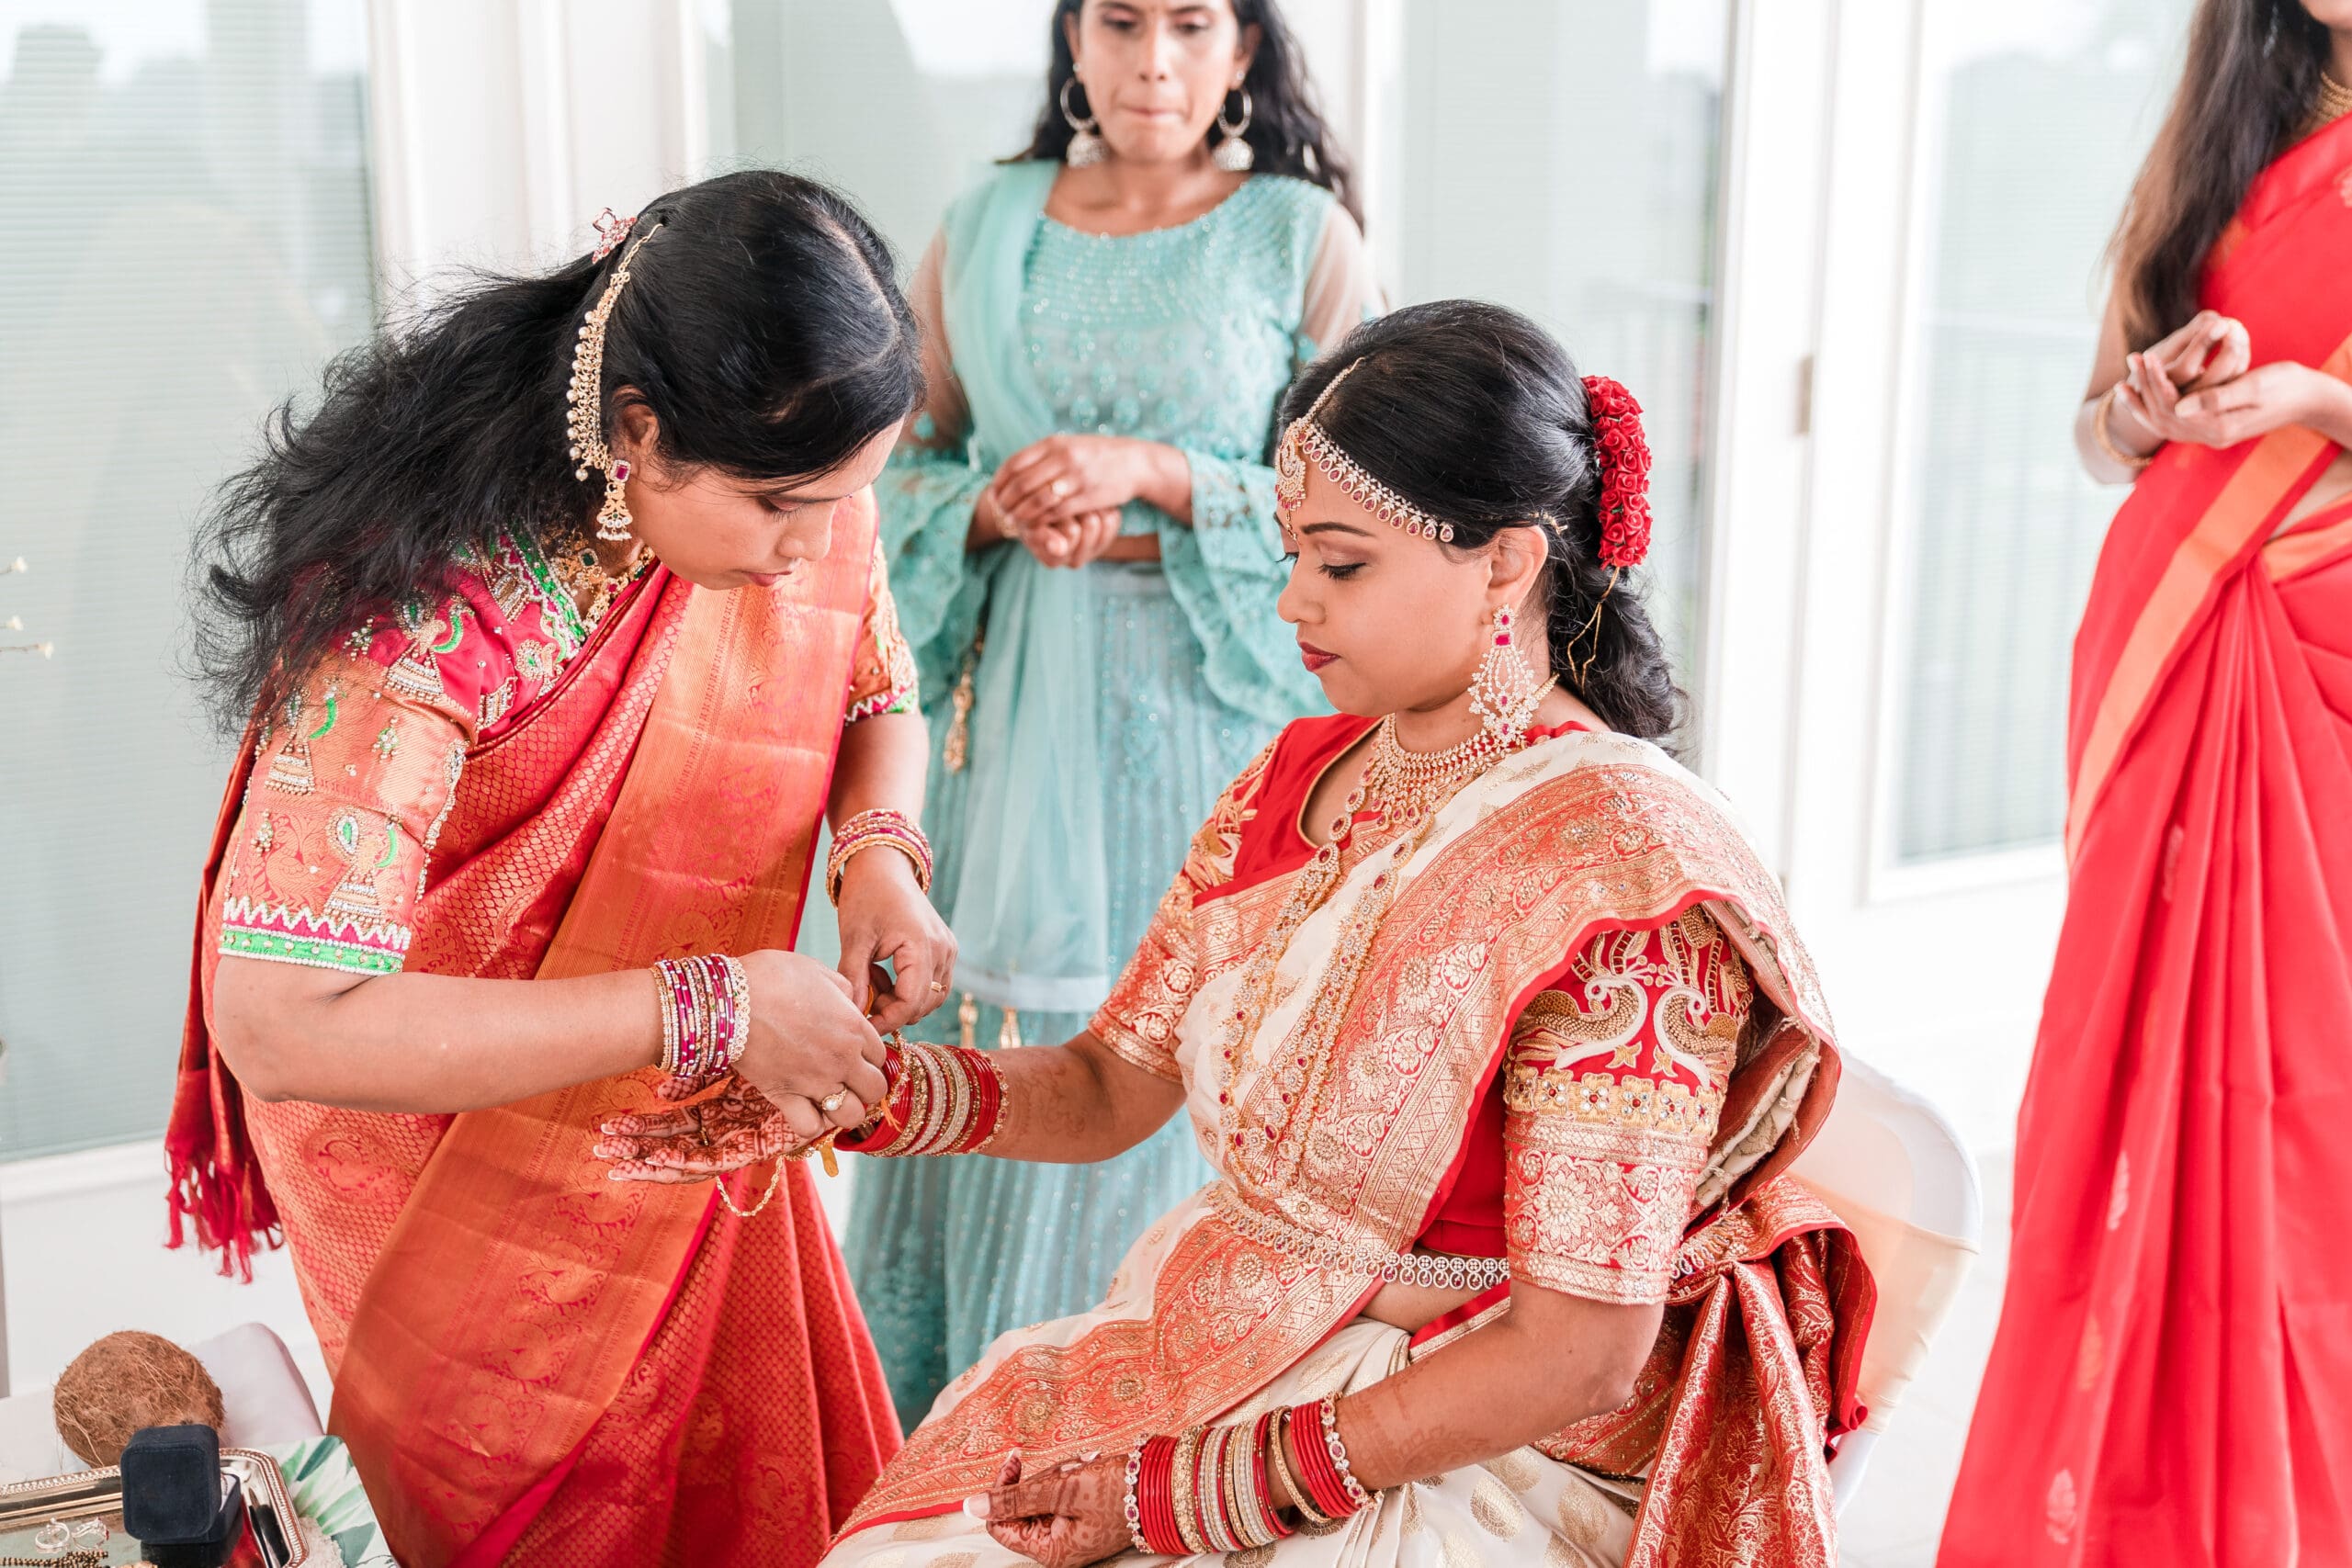 Bride in traditional Indian wedding attire getting her bracelets adjusted before the ceremony.